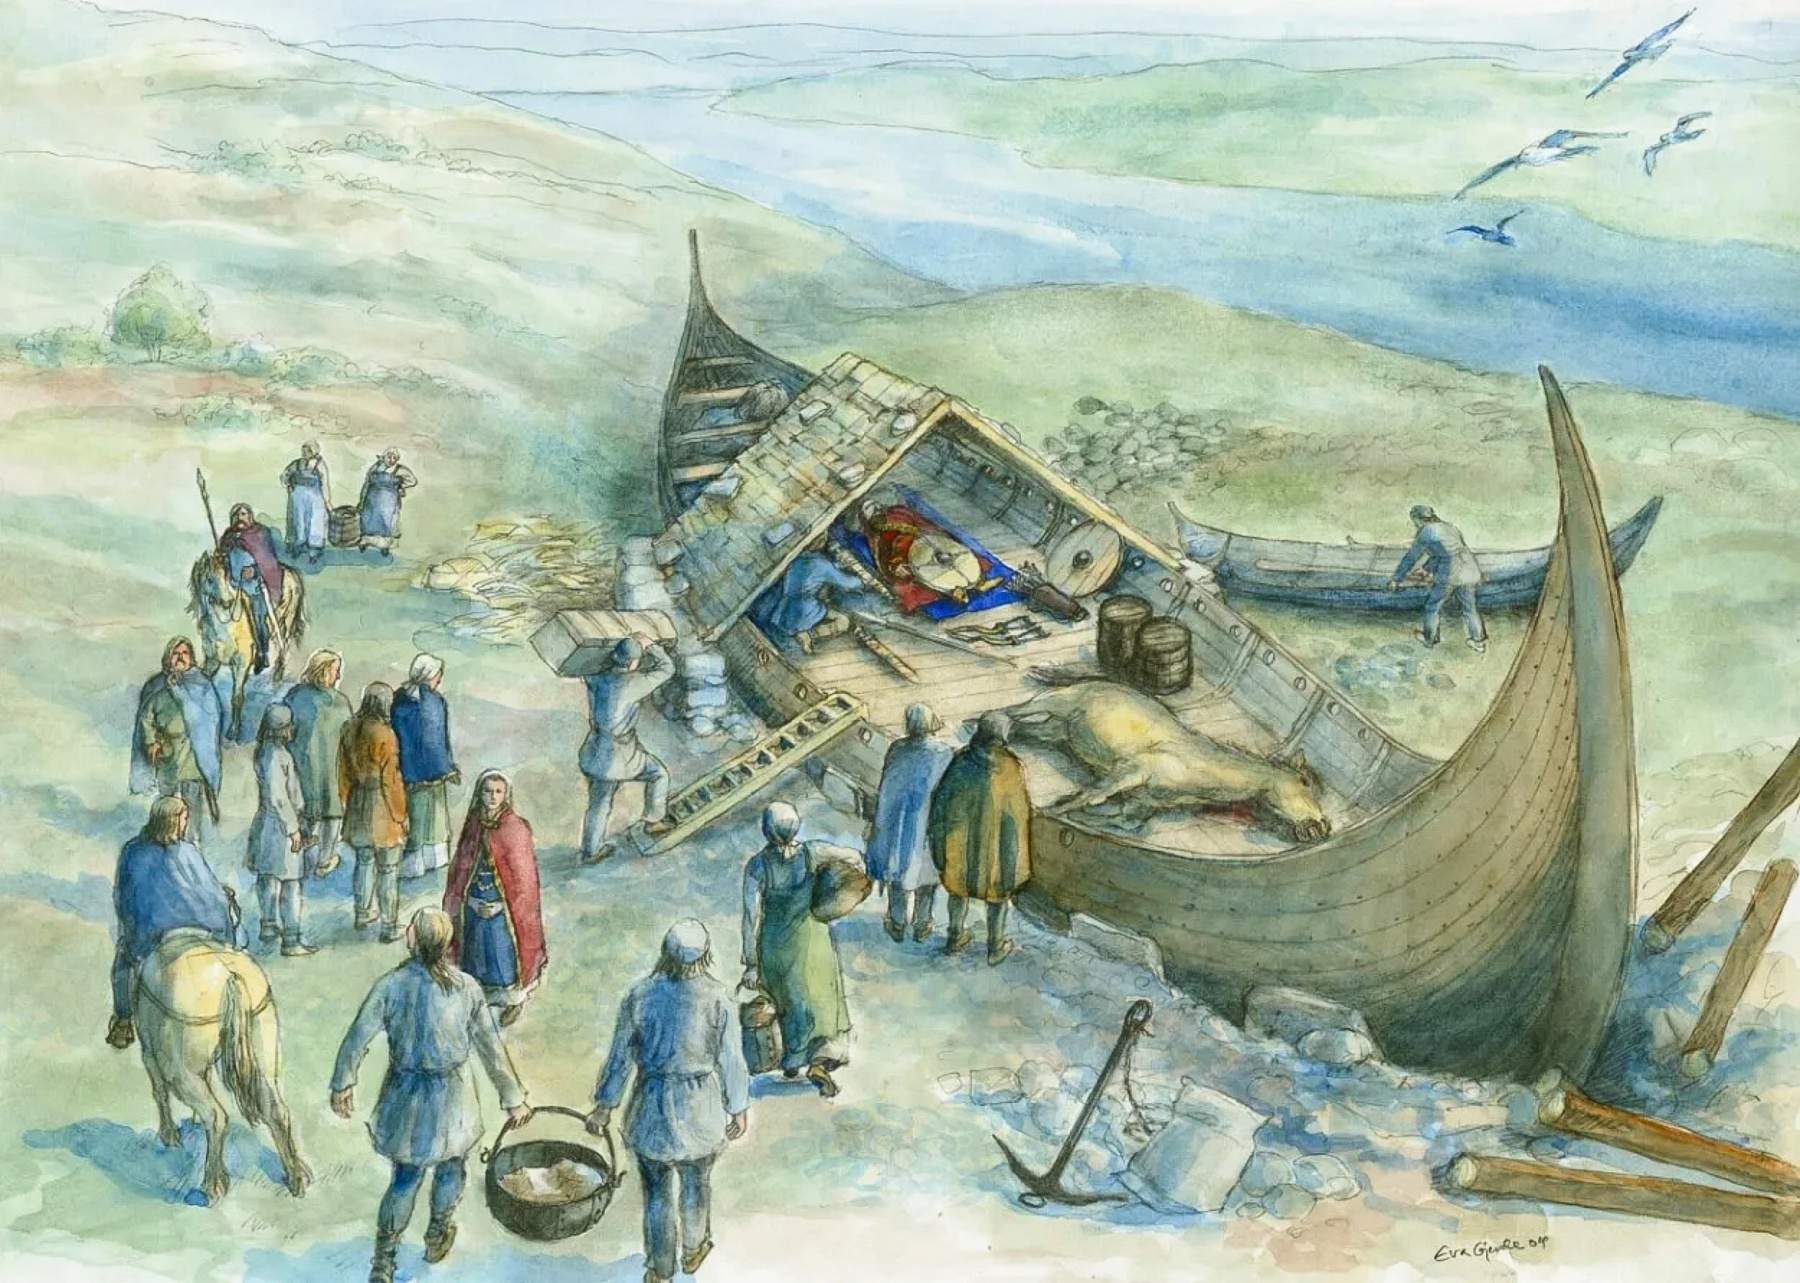 The Storhaug ship burial as it might have appeared in 779.